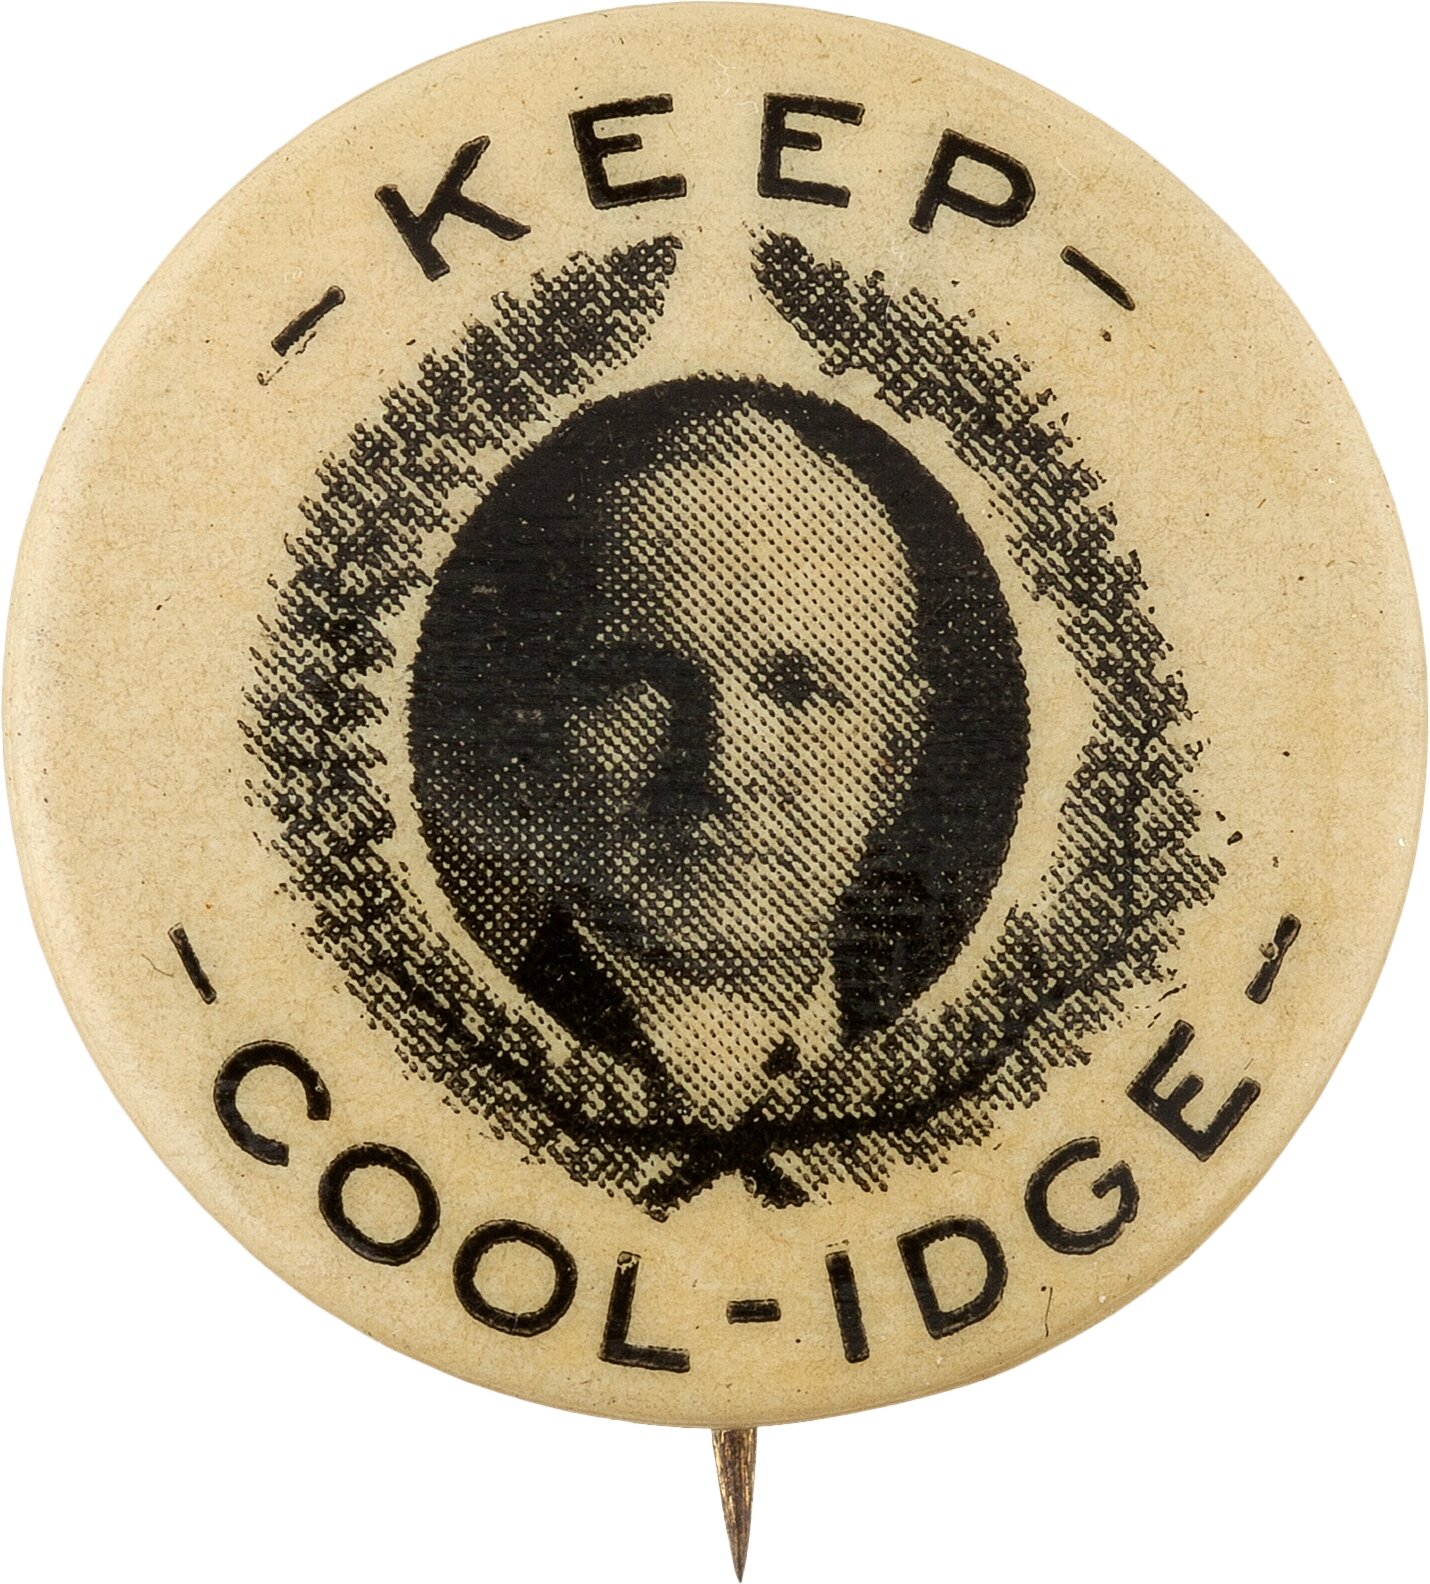 Keep Cool with Coolidge